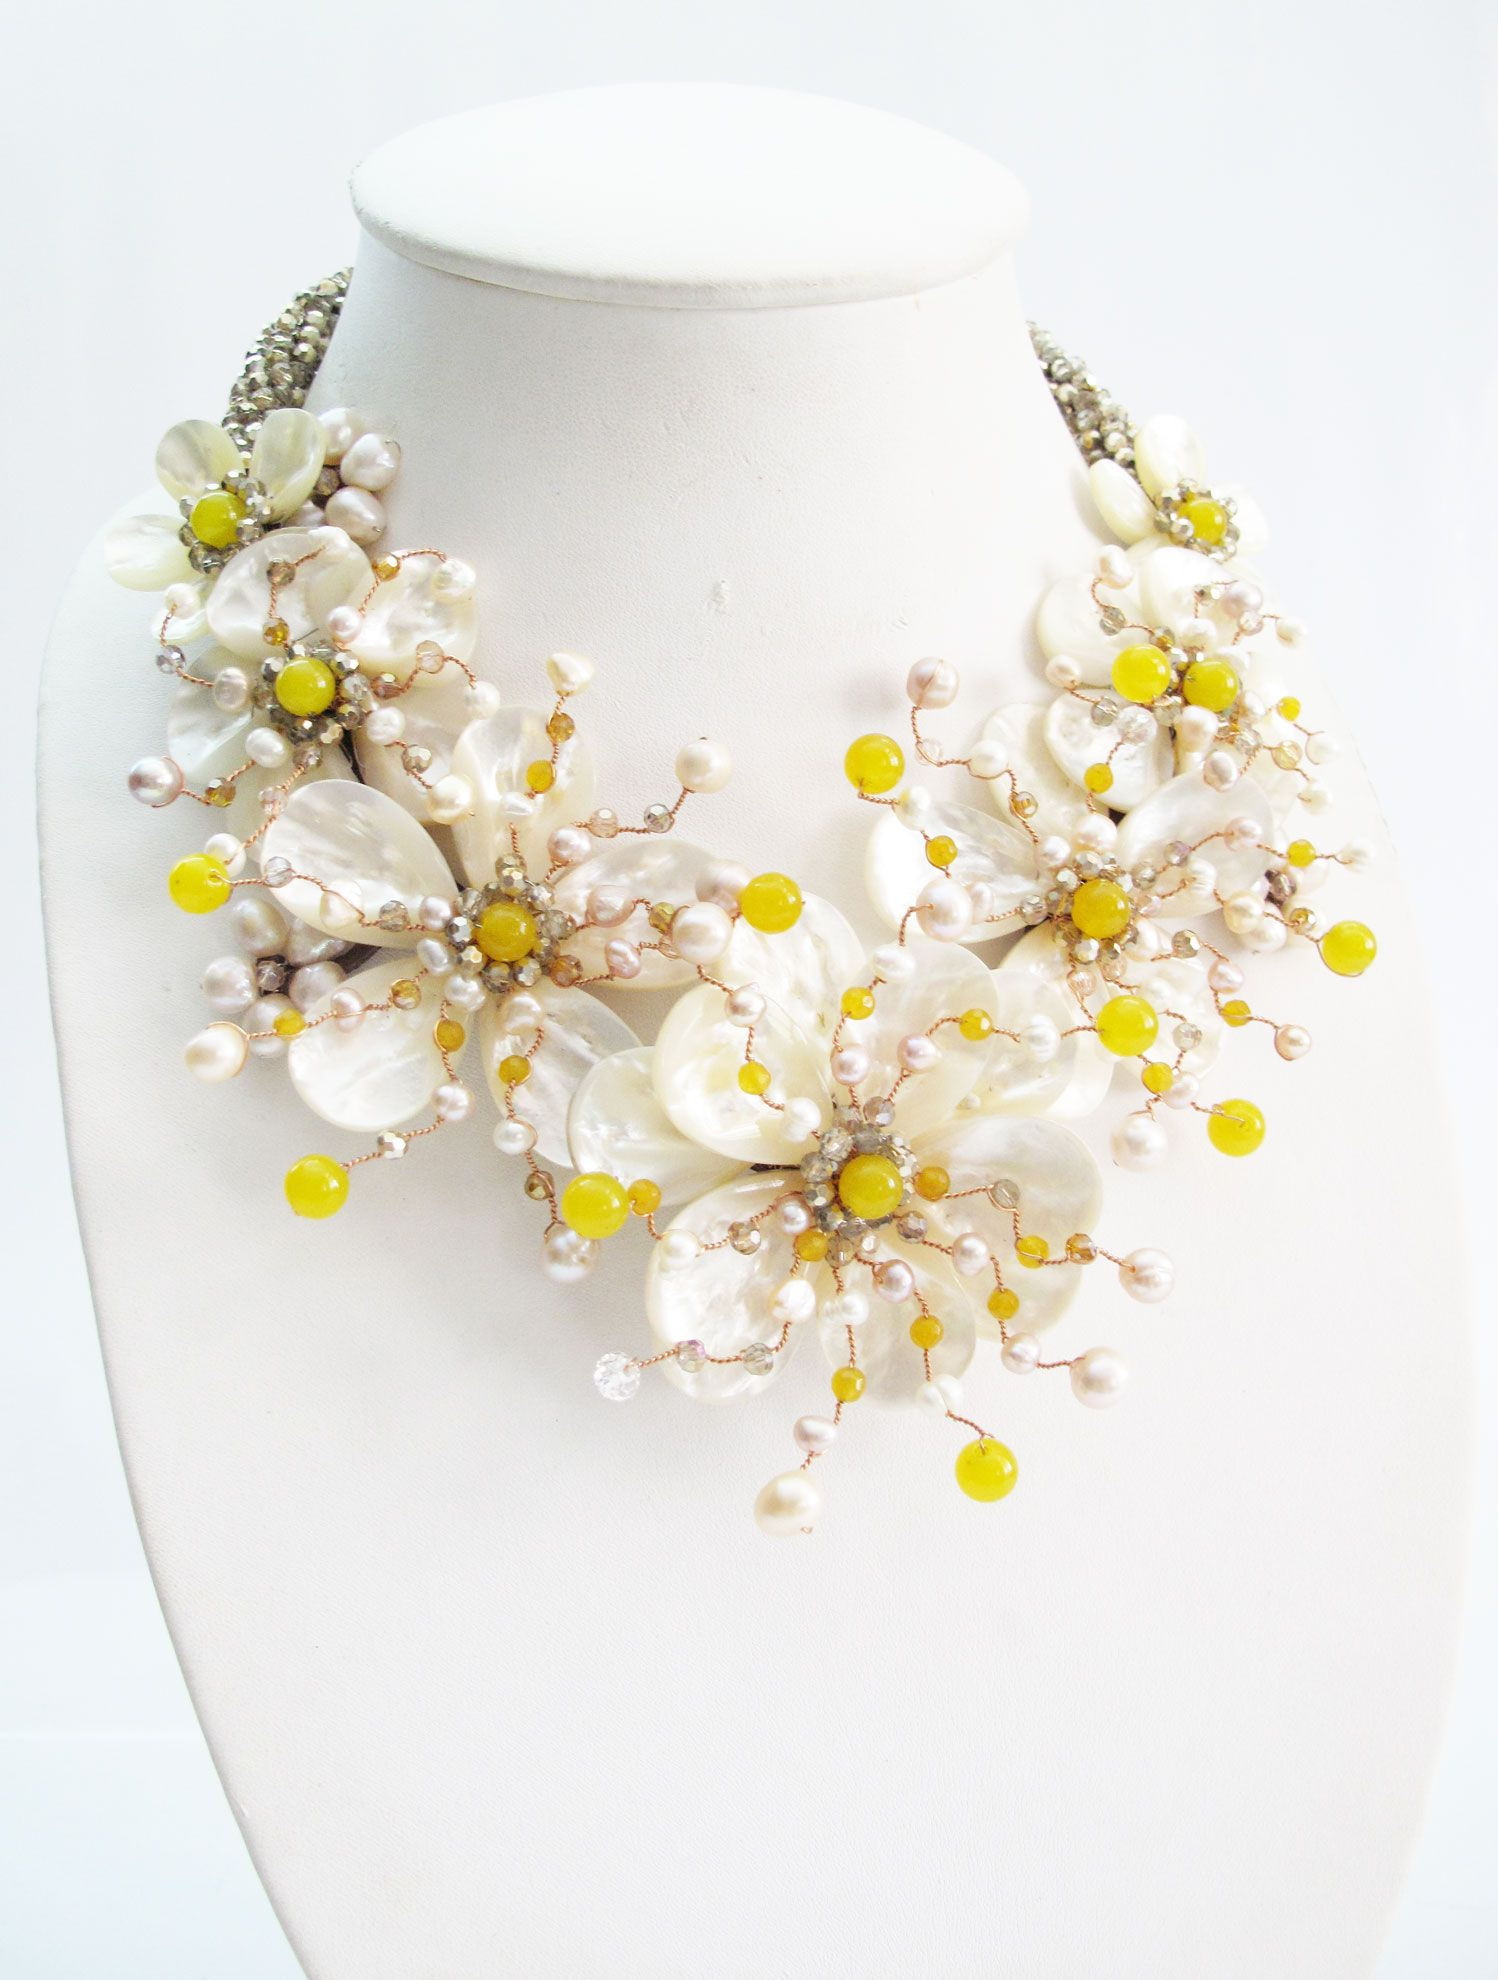 White shell floral and Yellow agate mix stones necklace and earring set collar style